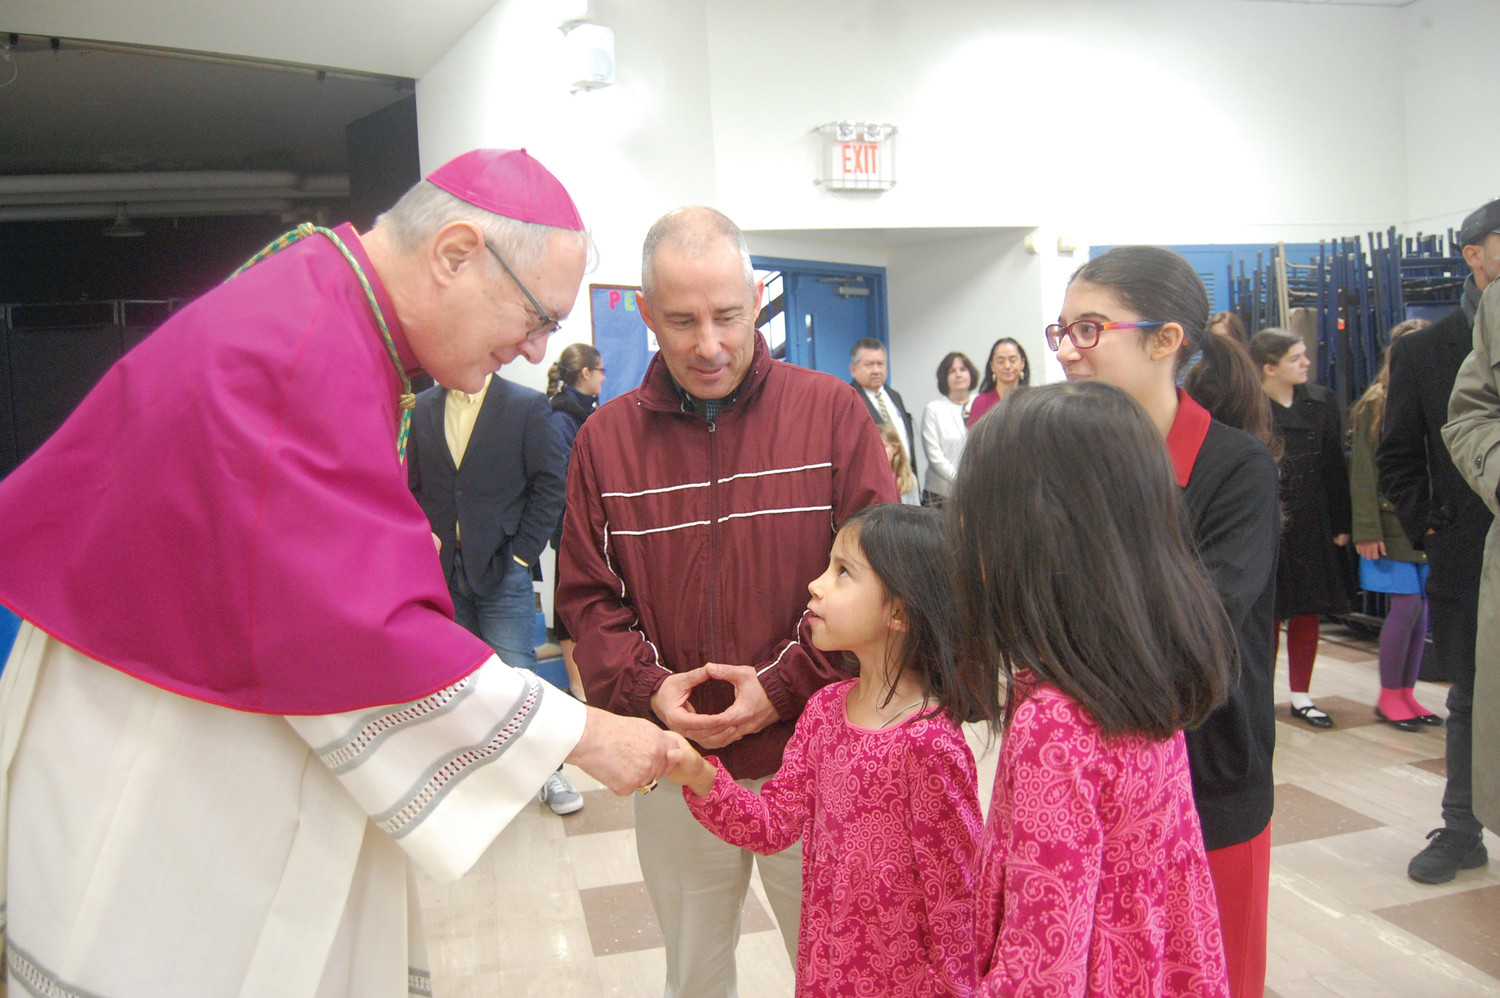 Bishop Thomas Tobin meets with parishioners during a recent visit to St. Mary’s Church on Broadway, where the Priestly Fraternity of St. Peter has assumed leadership.